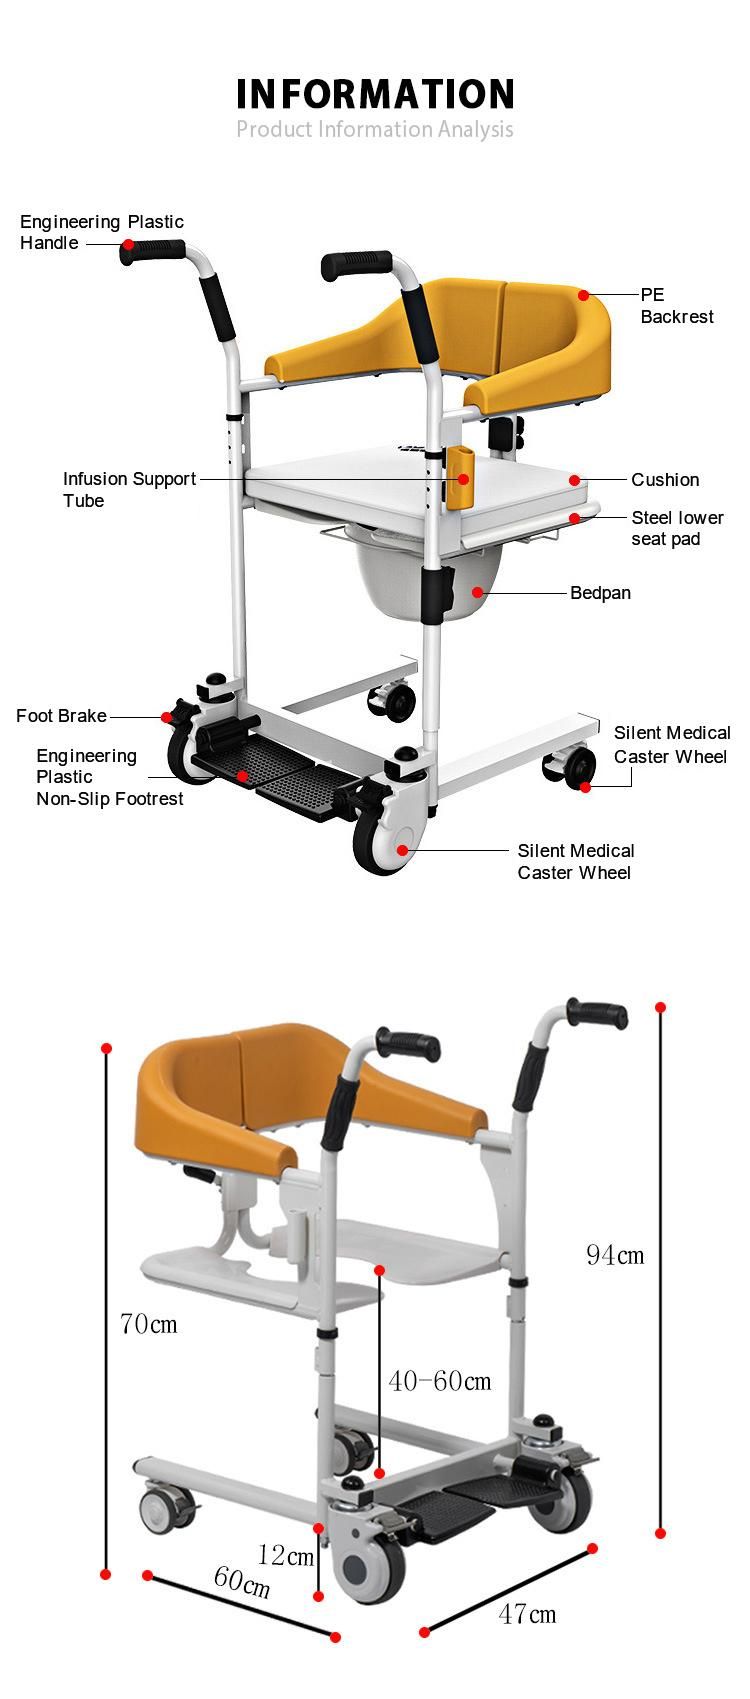 Transfer Chair for Elderly Disabled Load-Bearing 120kg Commode Wheelchair